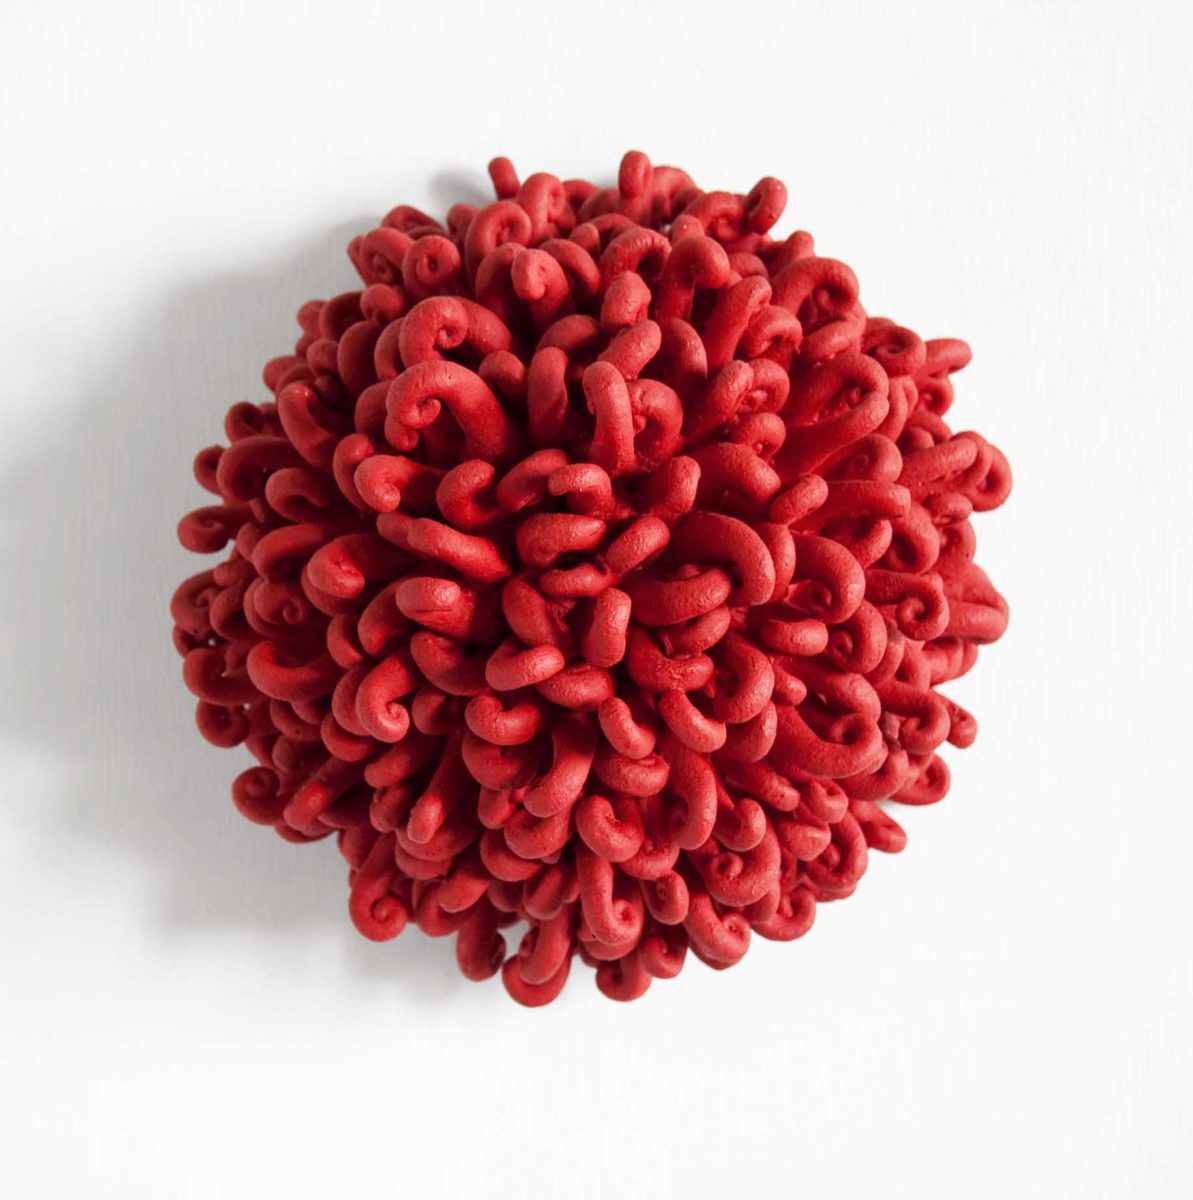 The force 2003, Sculpture by Kazumasa Mizokami, many red curled tentacle shaped objects making a hemisphere shape and appears to start moving.